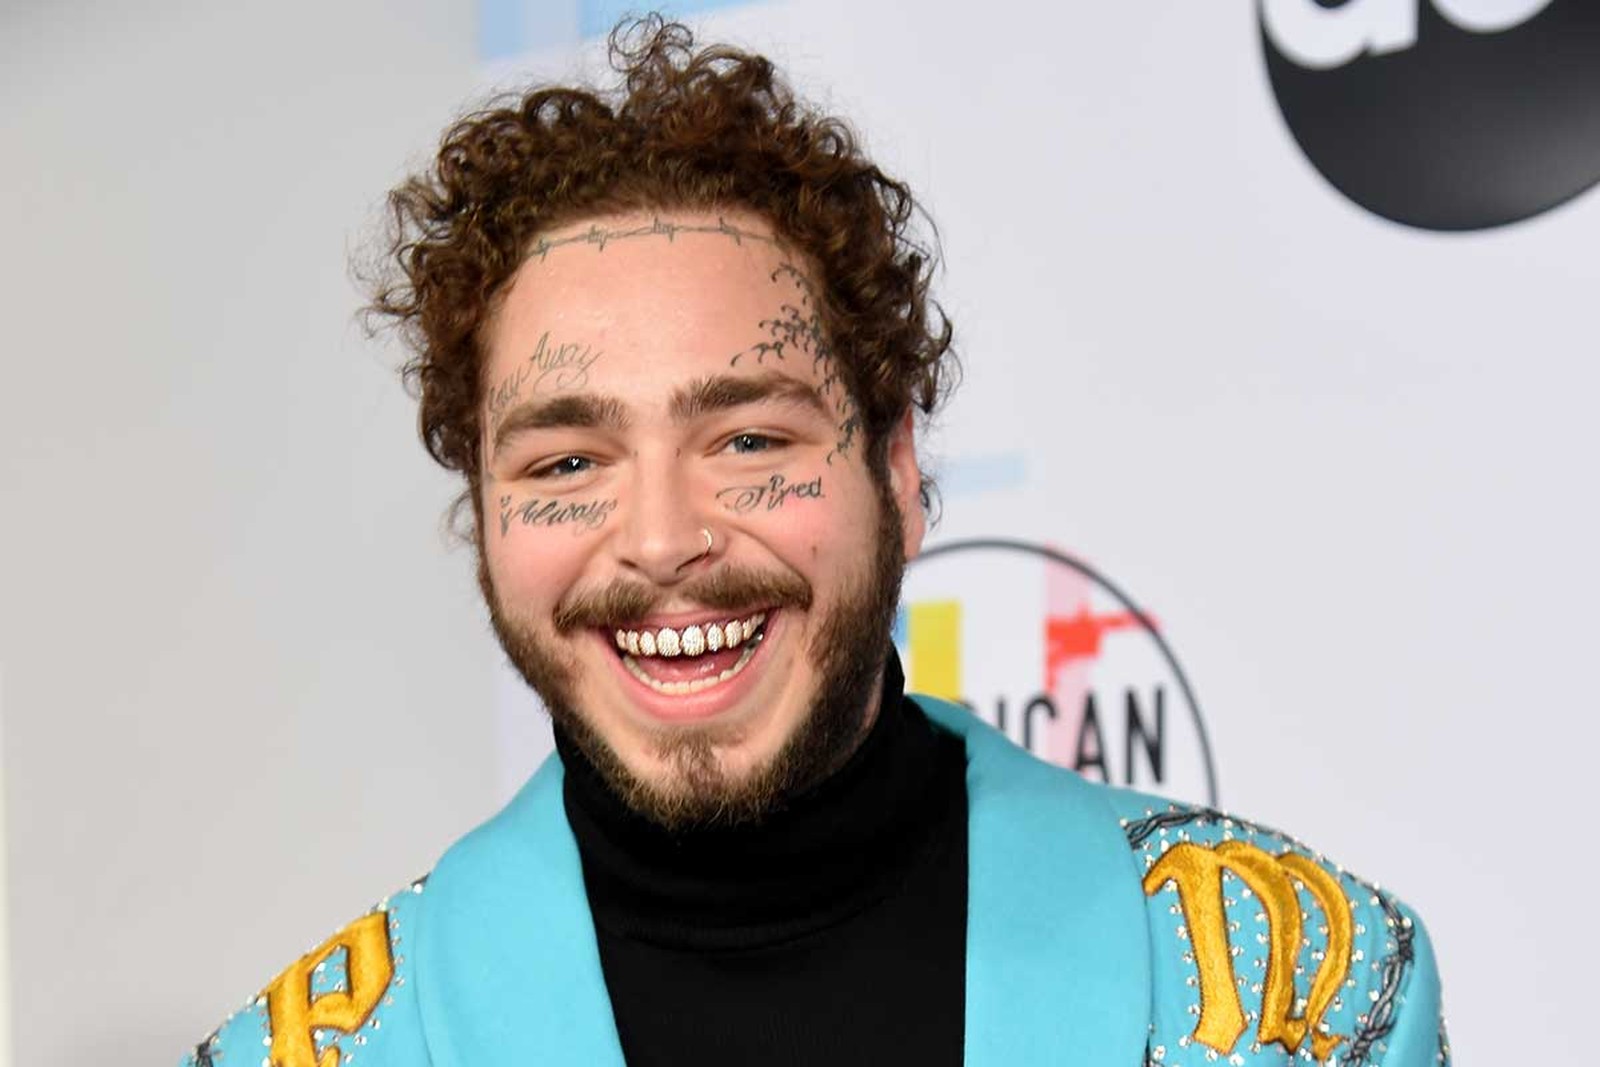 Post Malone Releases Fifth Croc Collaboration and Exclusive Rosé Brand ‘Maison No. 9’ in the UK